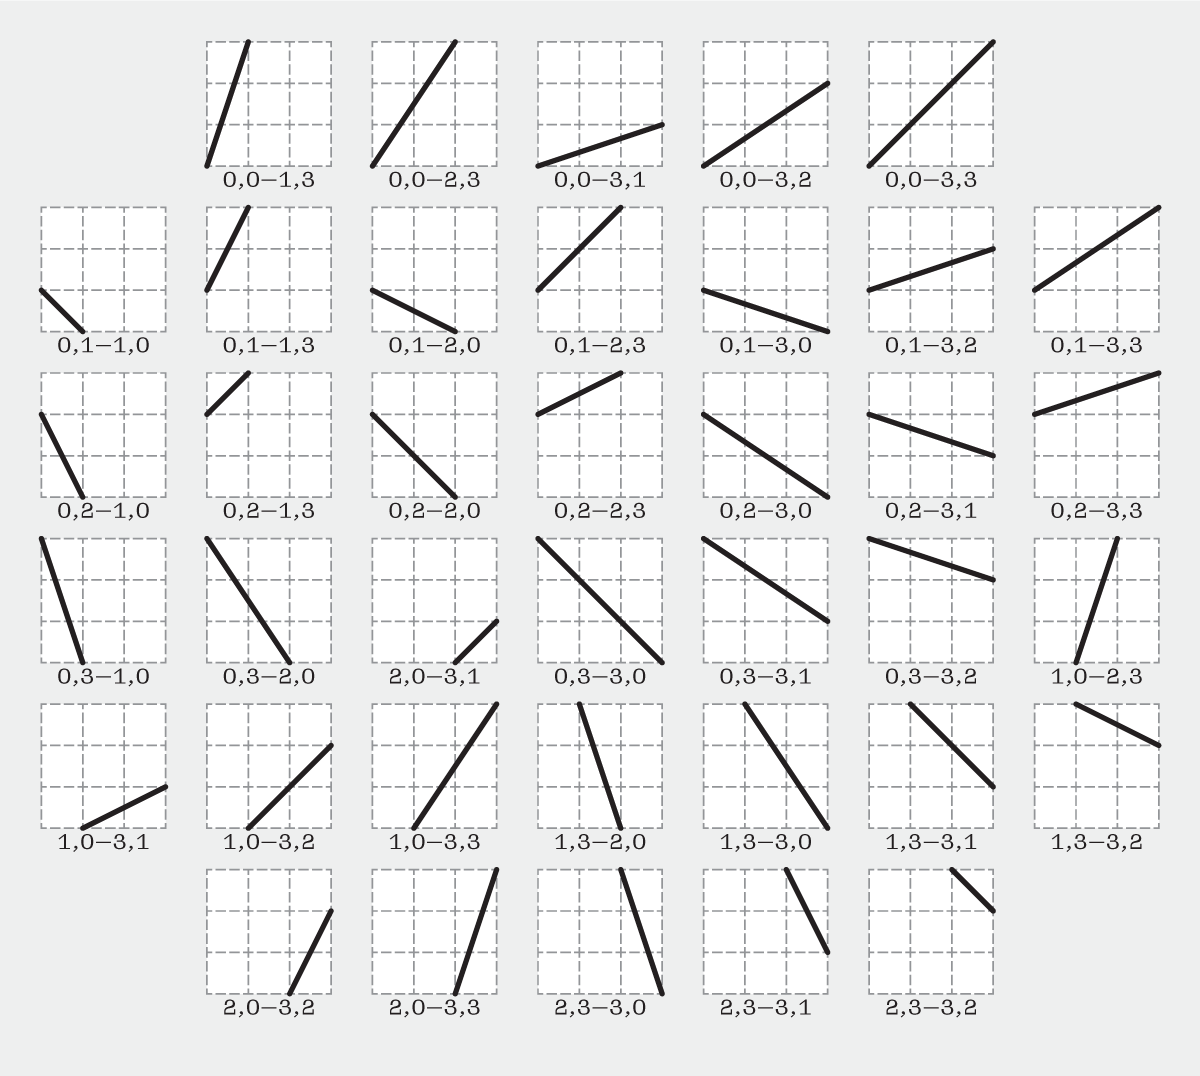 A diagram showing 38 unique diagonal lines, each with its corresponding coordinates on a 3×3 grid